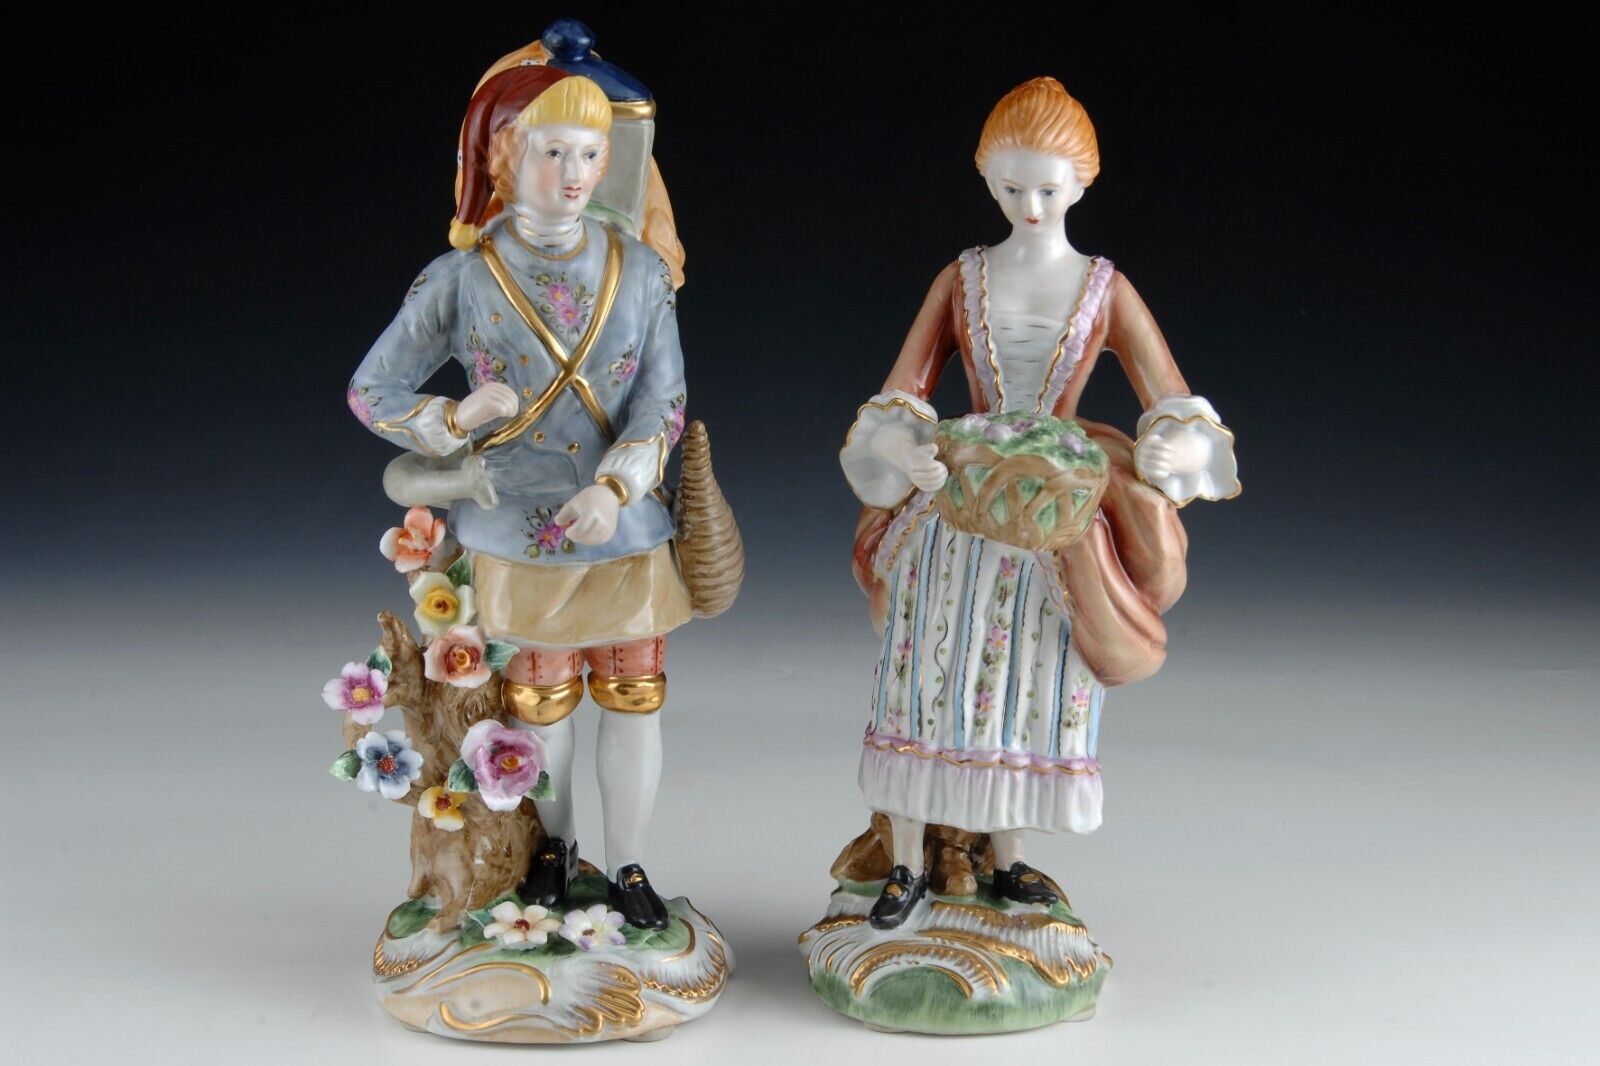 Porcelain figurines. Water bearer and young lady. After models from Sèvres Unbranded